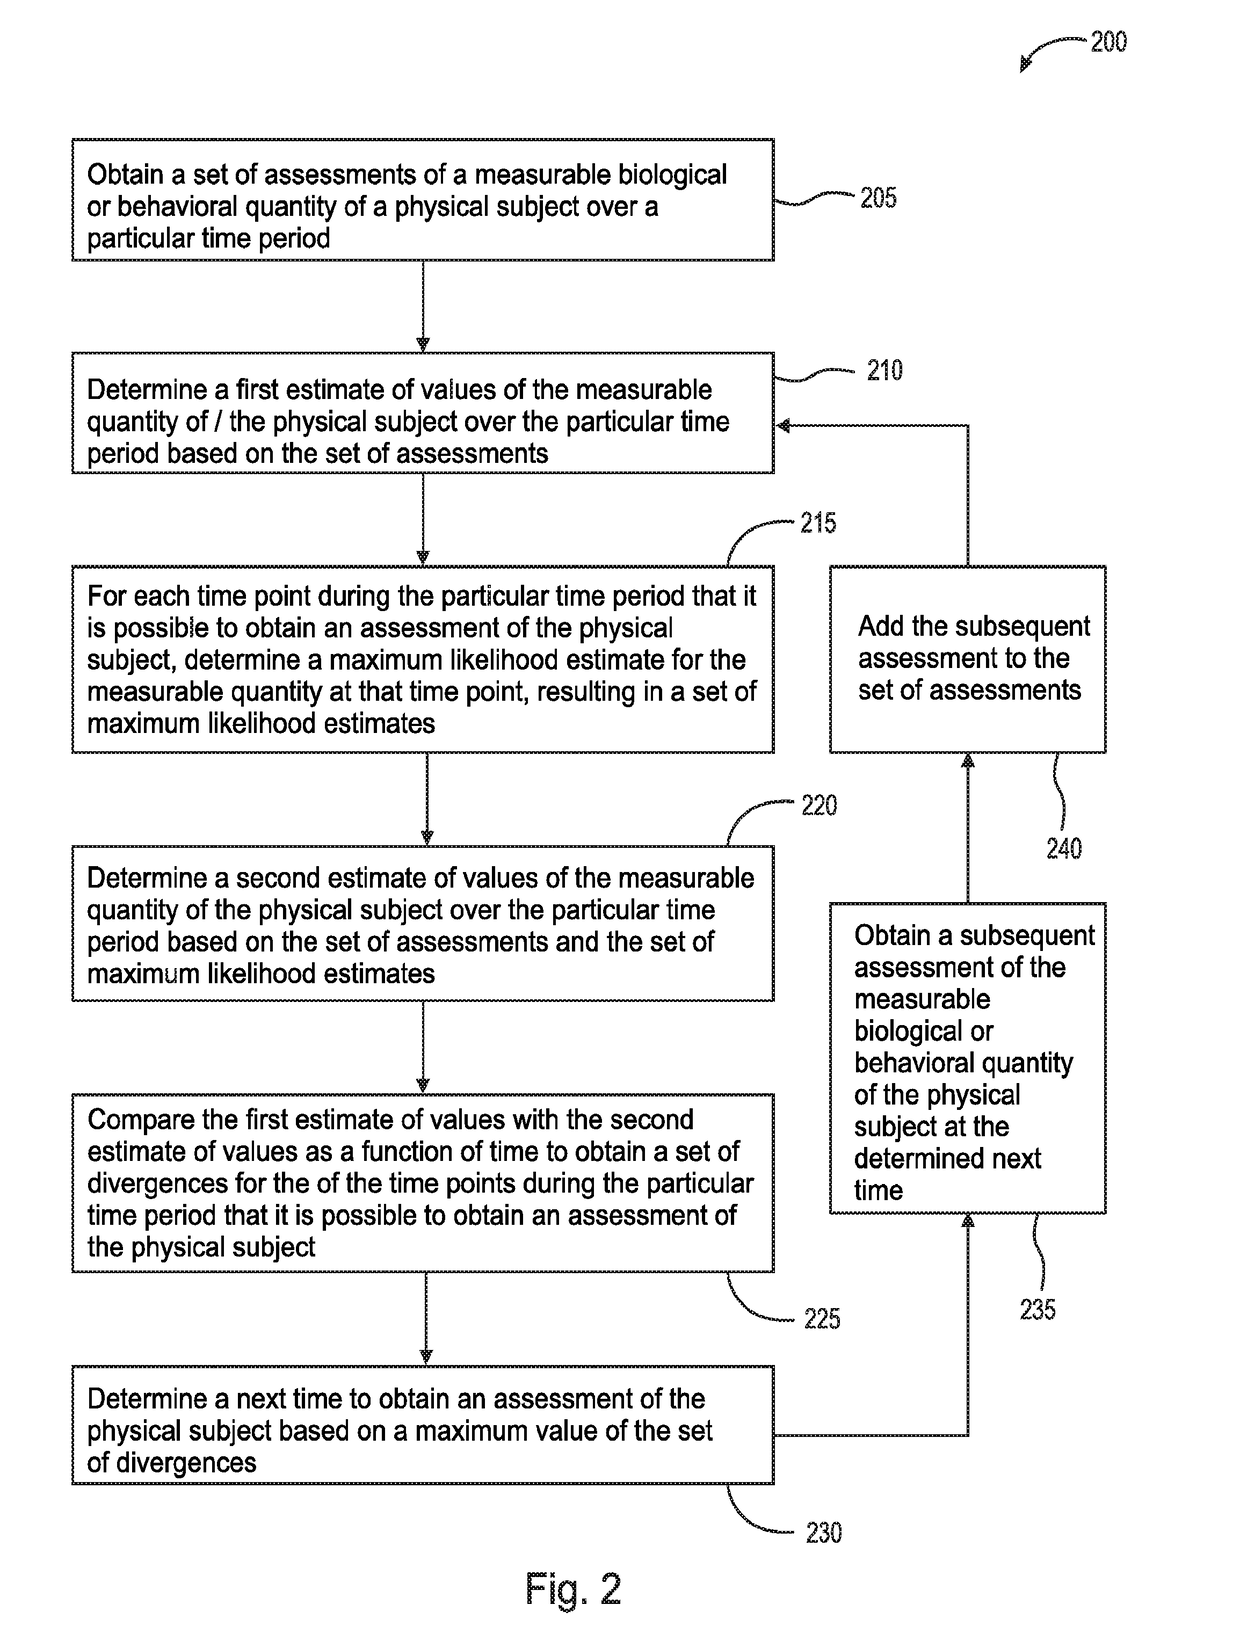 Method And System For Adaptive Scheduling Of Clinical Assessments